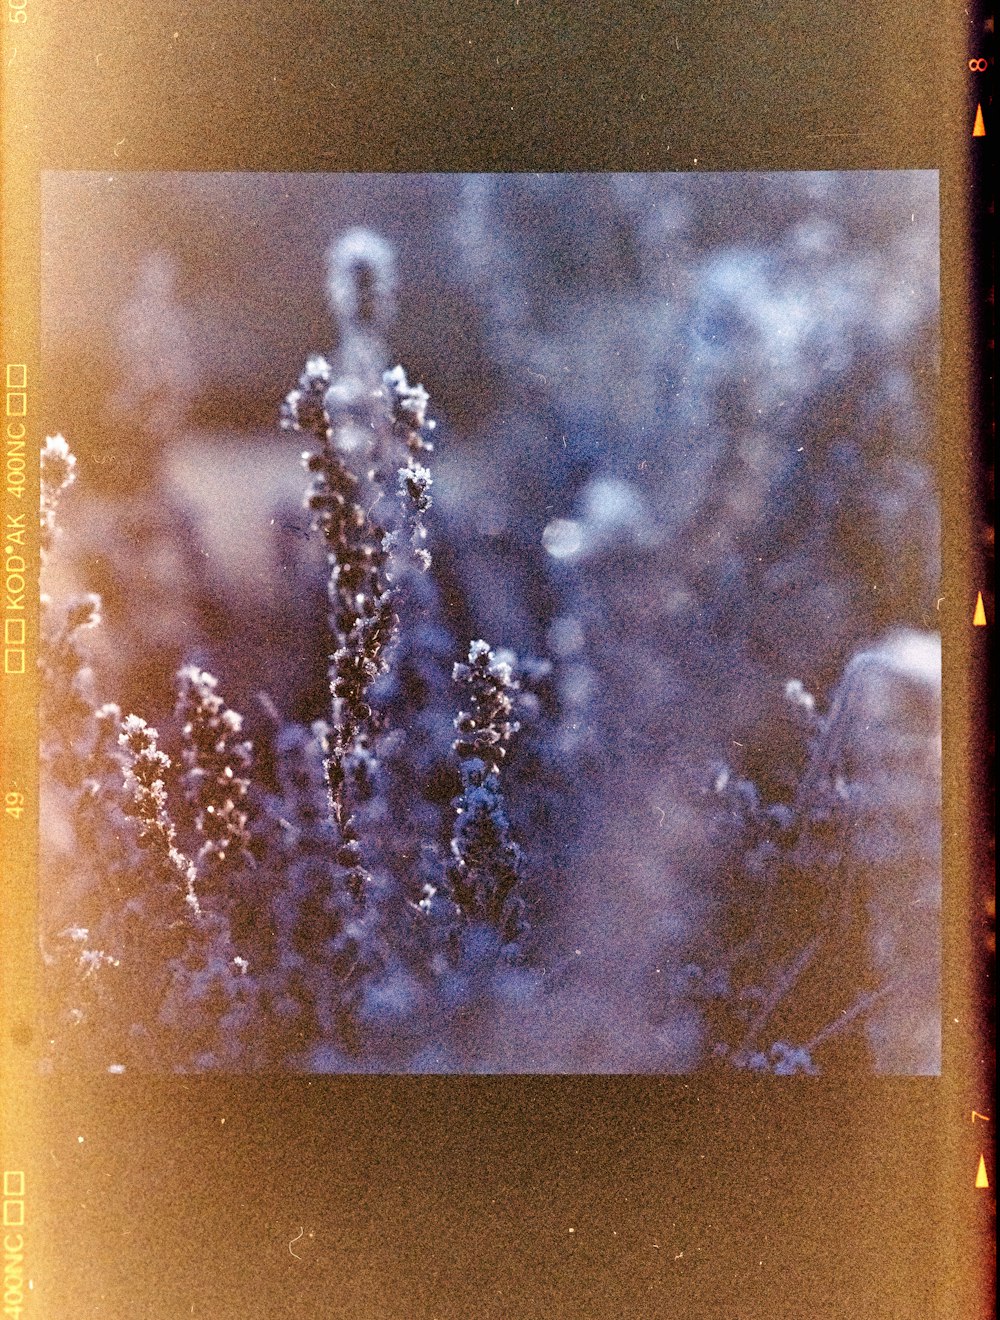 a polaroid picture of a plant with snow on it